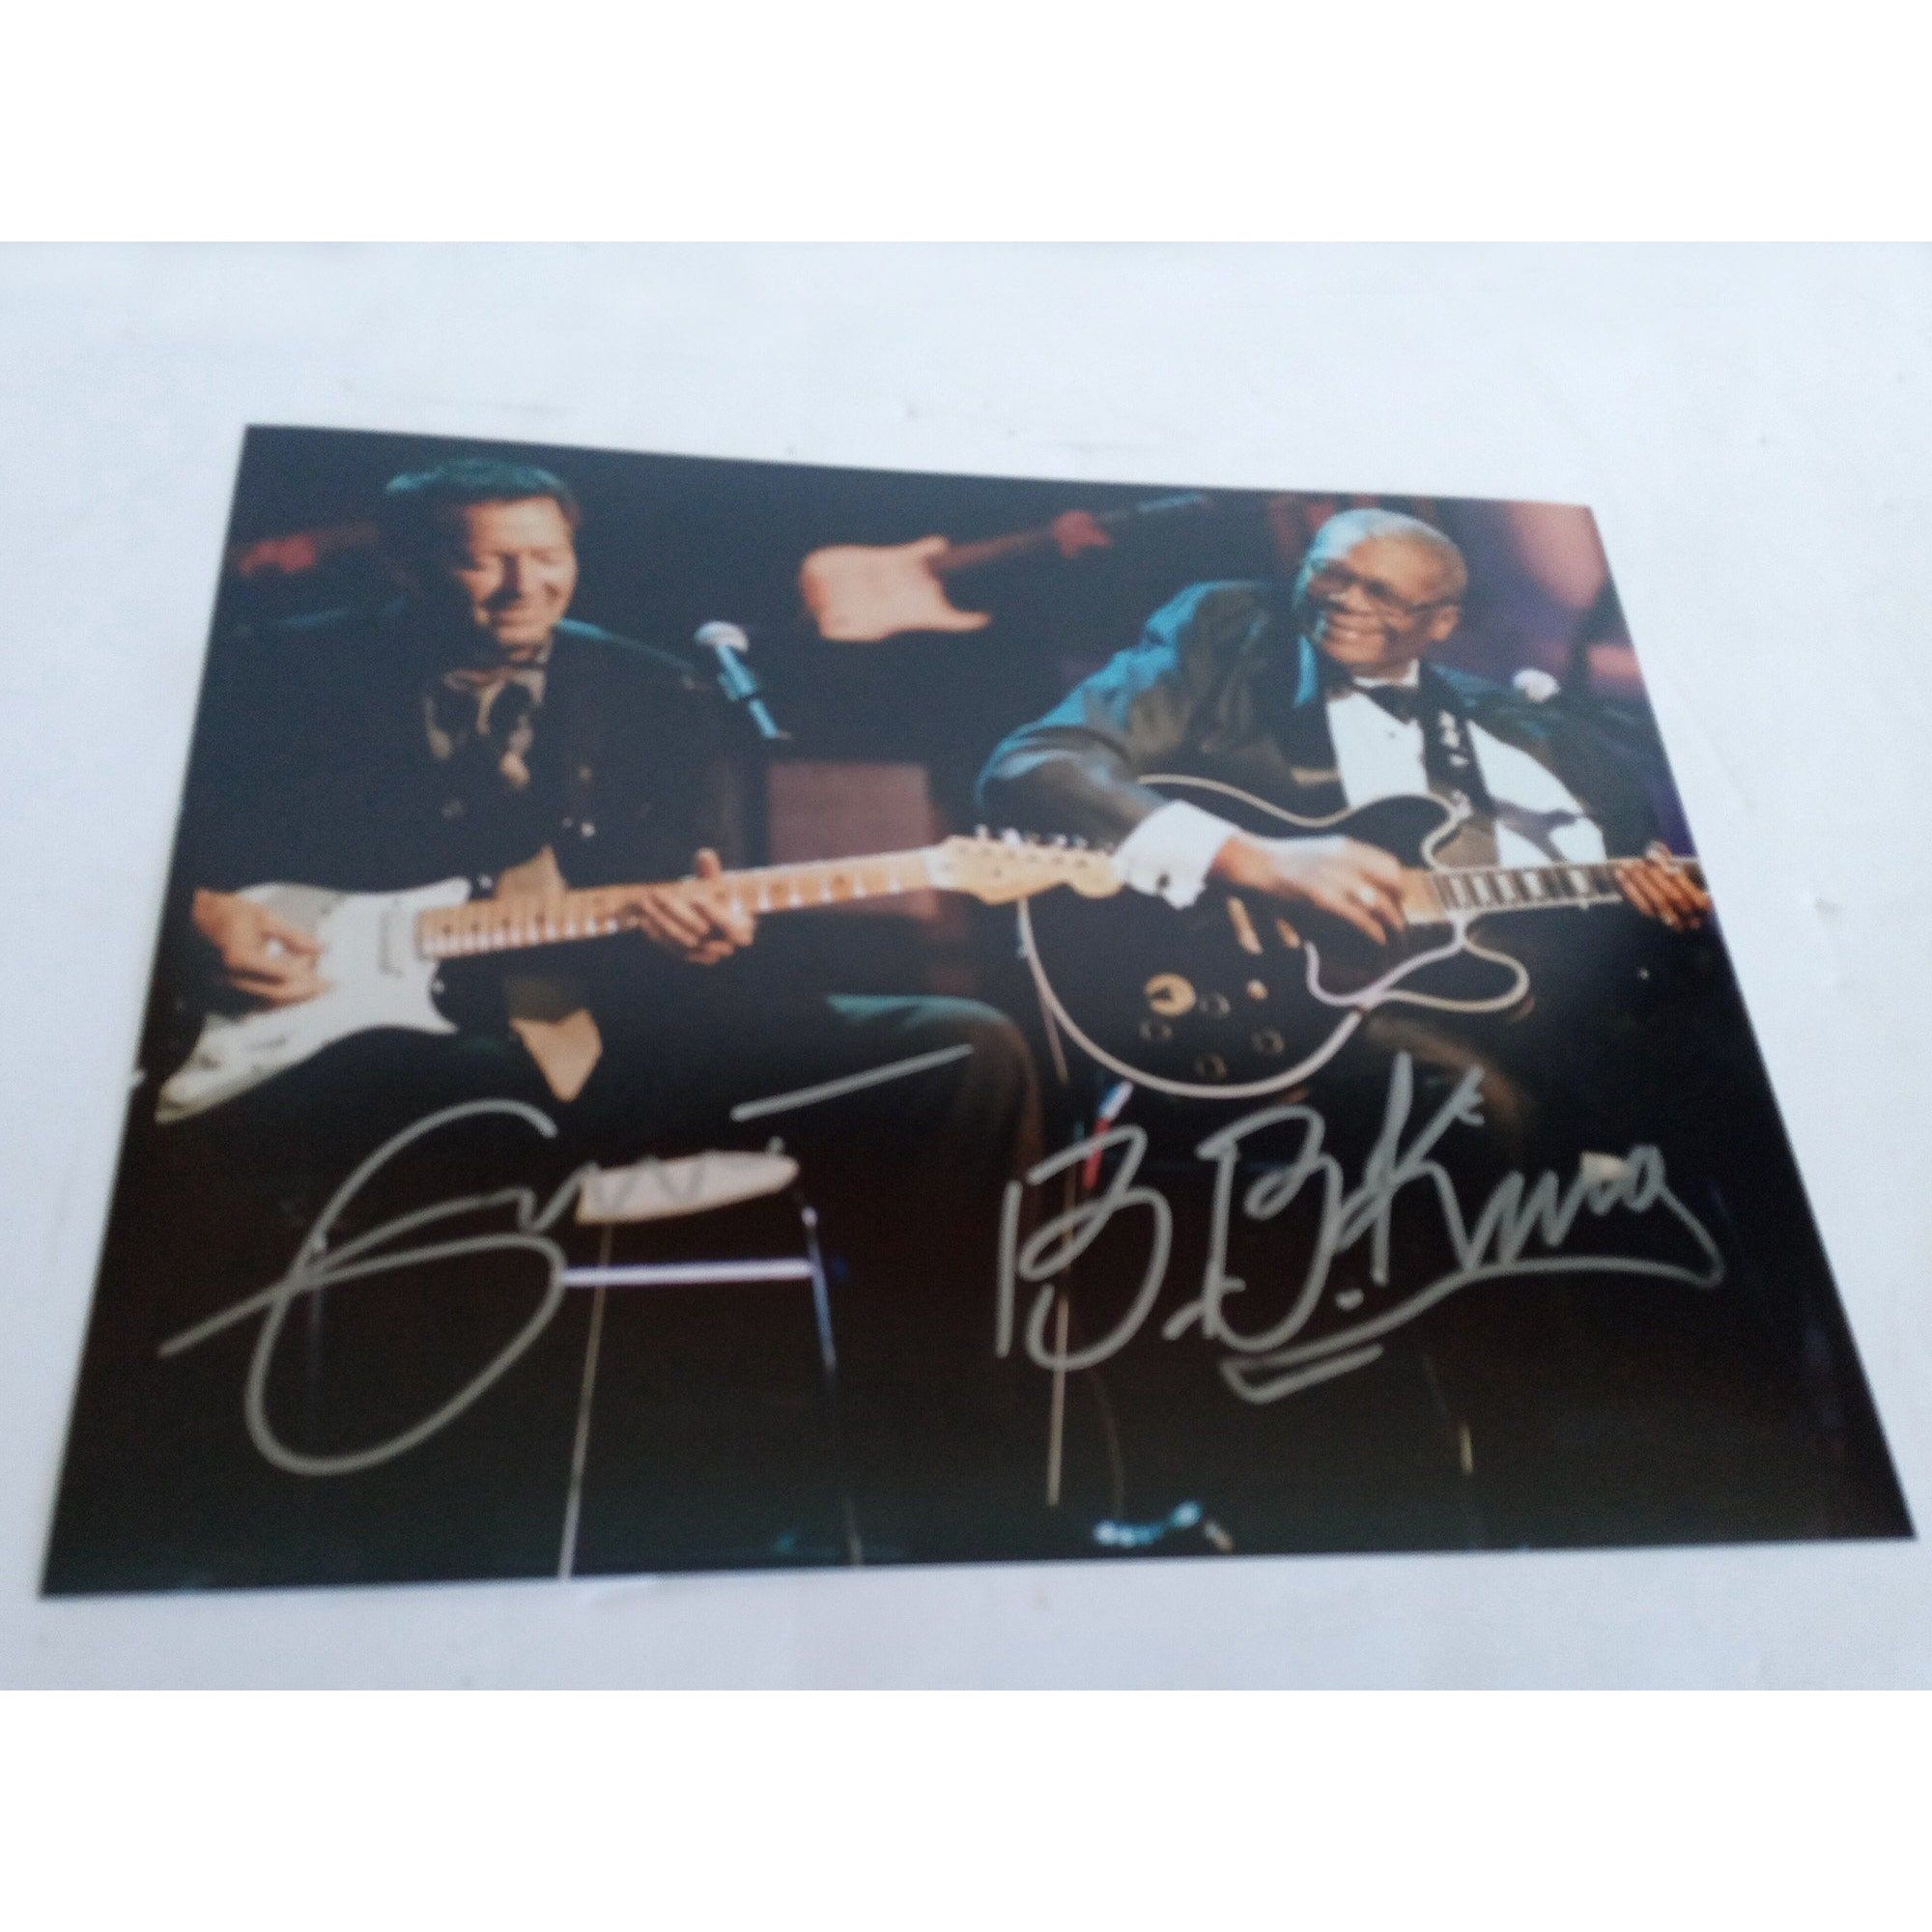 Eric Clapton and B.B. King 8 x 10 signed photo with proof